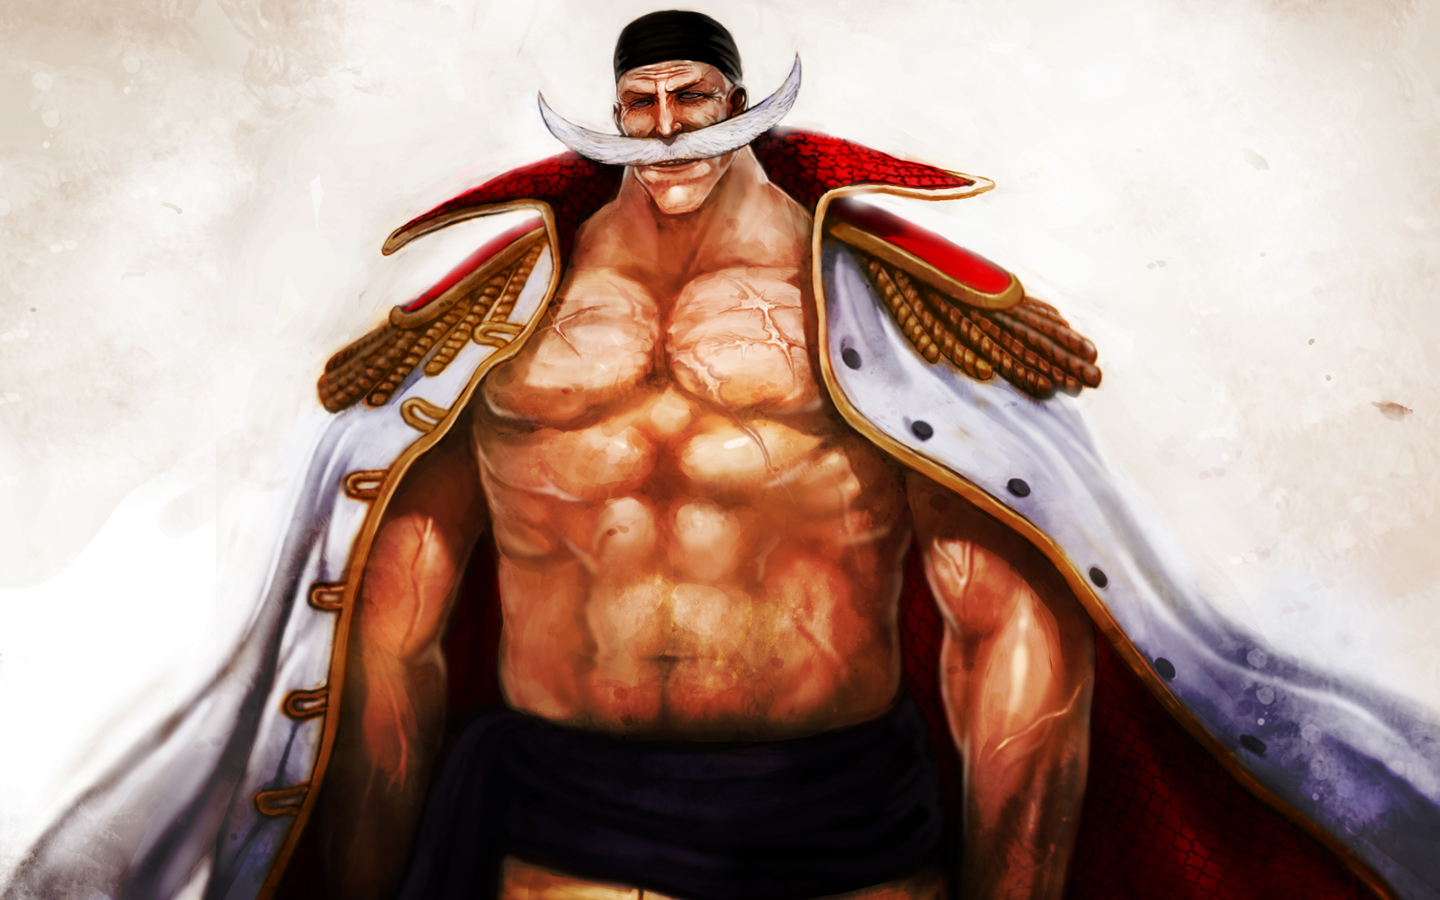 whitebeard wallpaper, muscle, chest, arm, barechested, fictional character